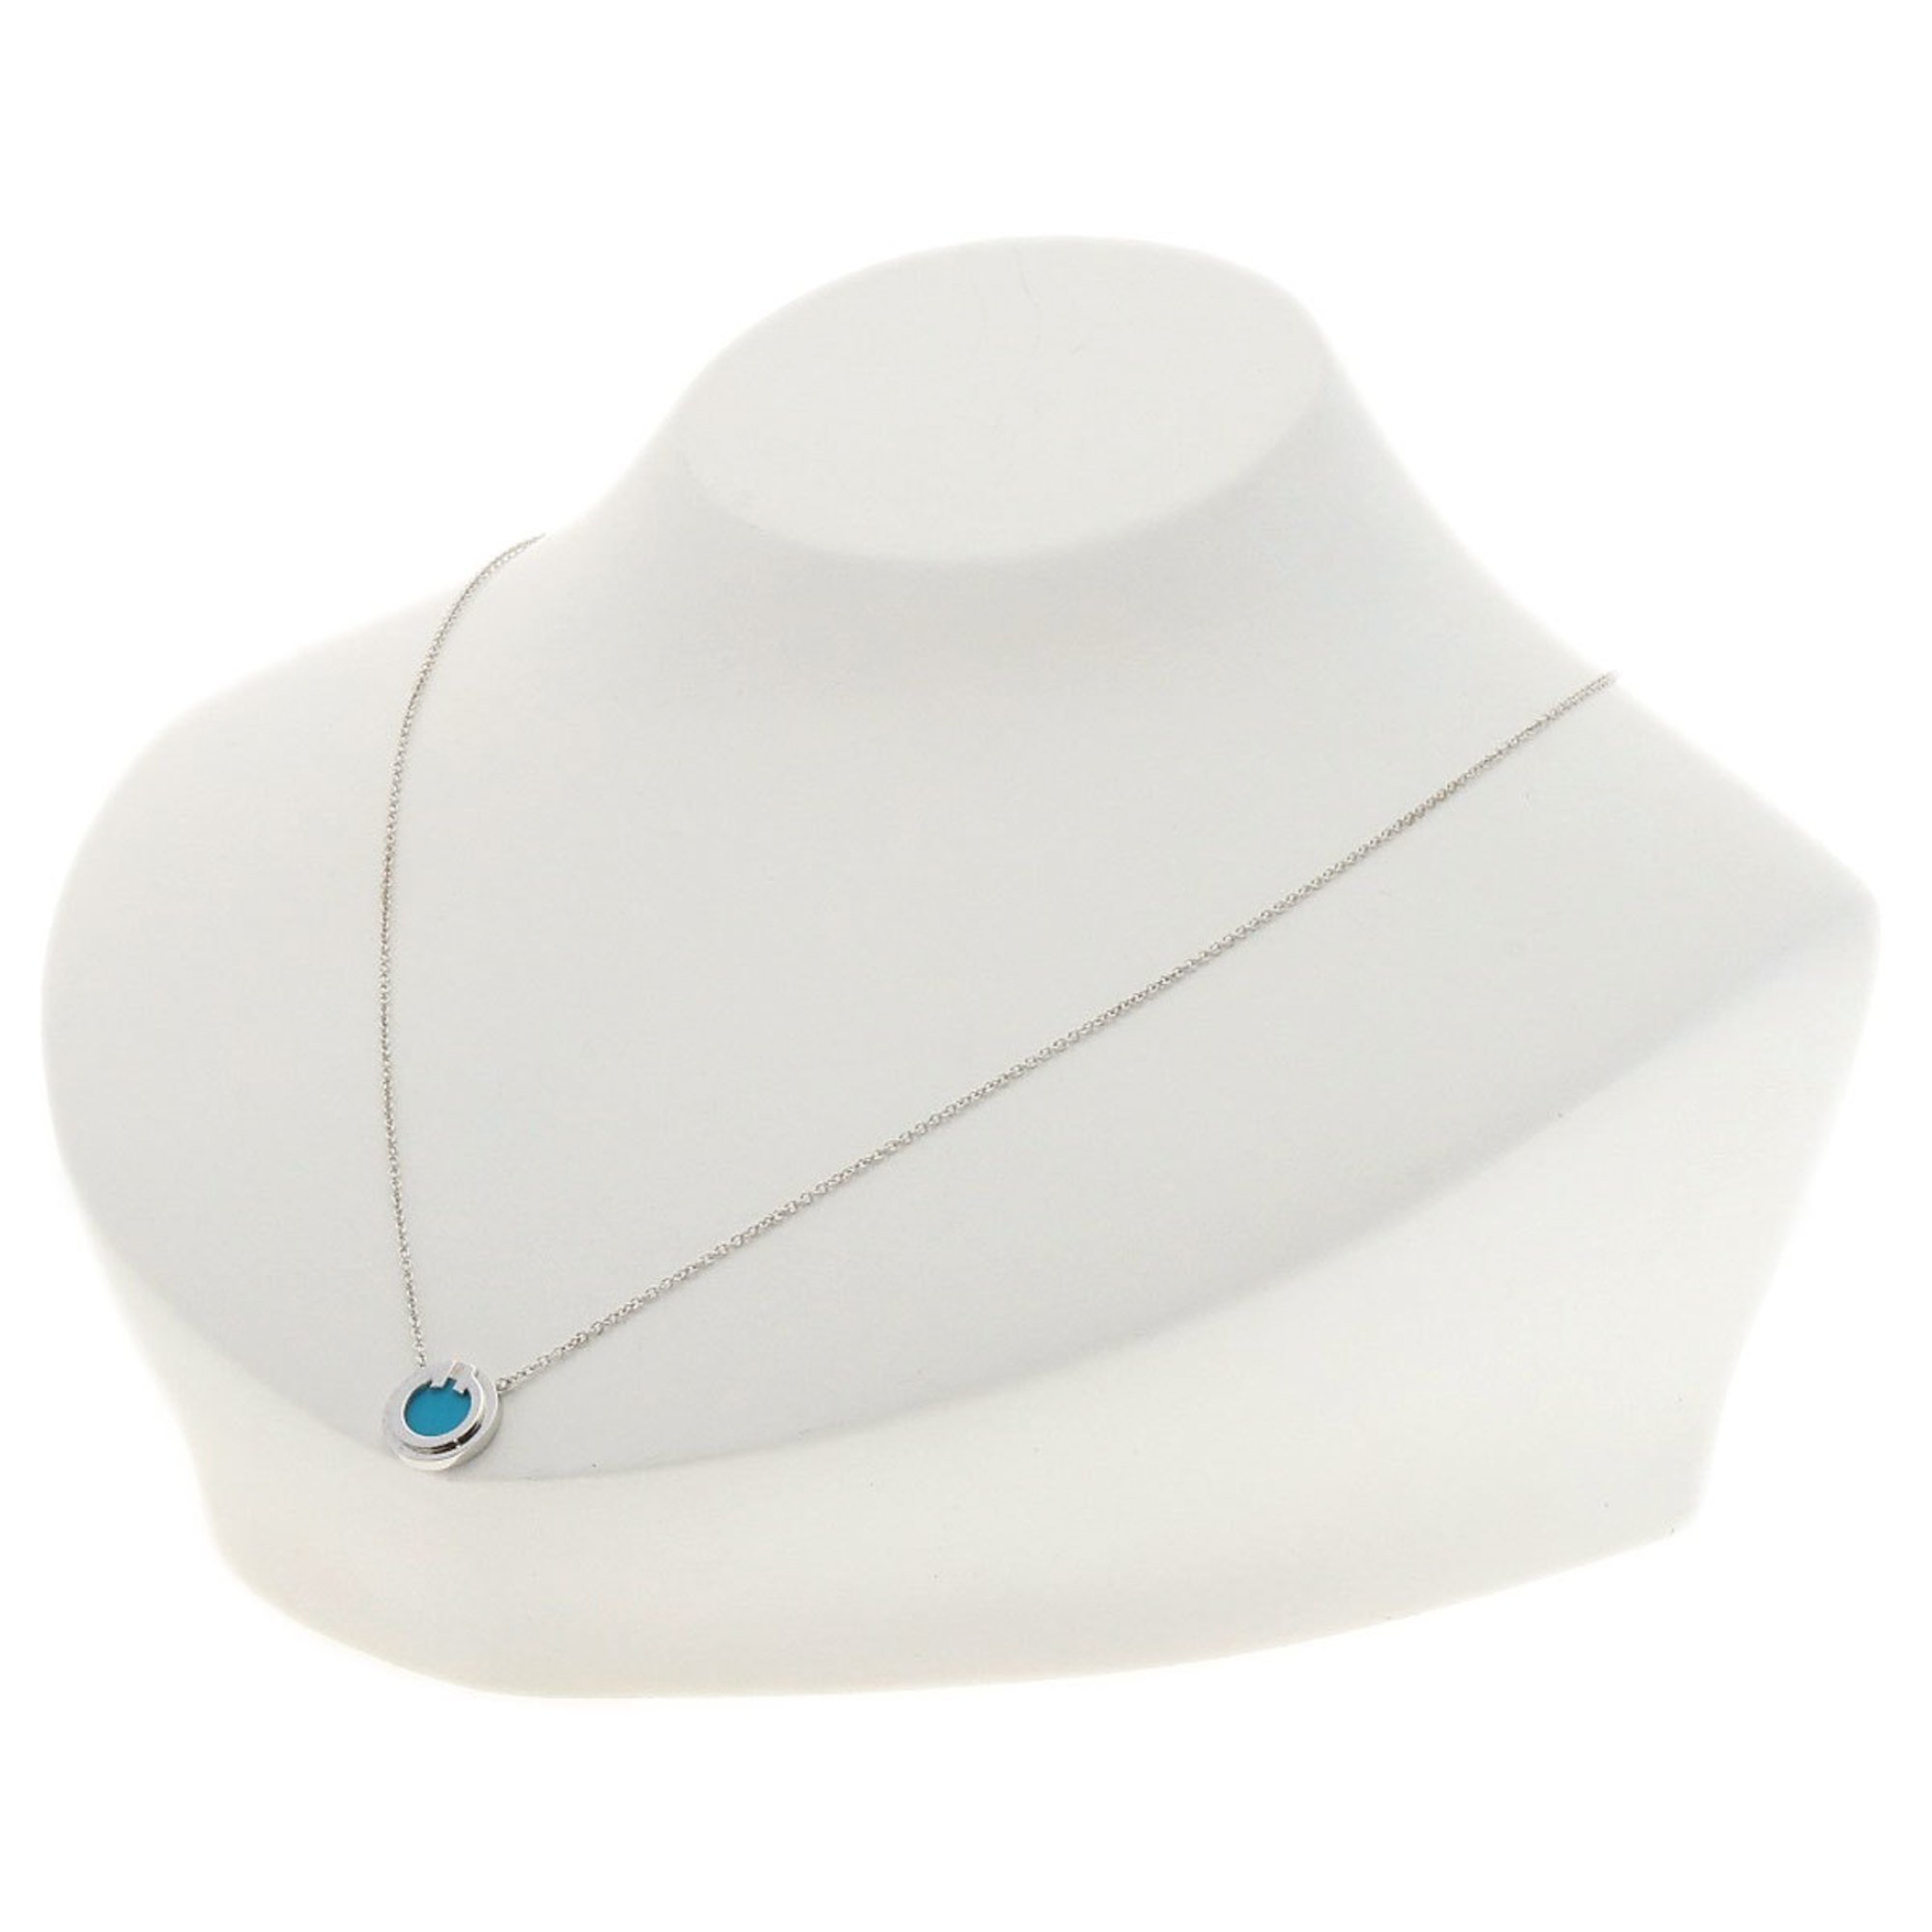 Tiffany T TWO Turquoise Circle 2022 Limited Necklace K18 White Gold Women's TIFFANY&Co.